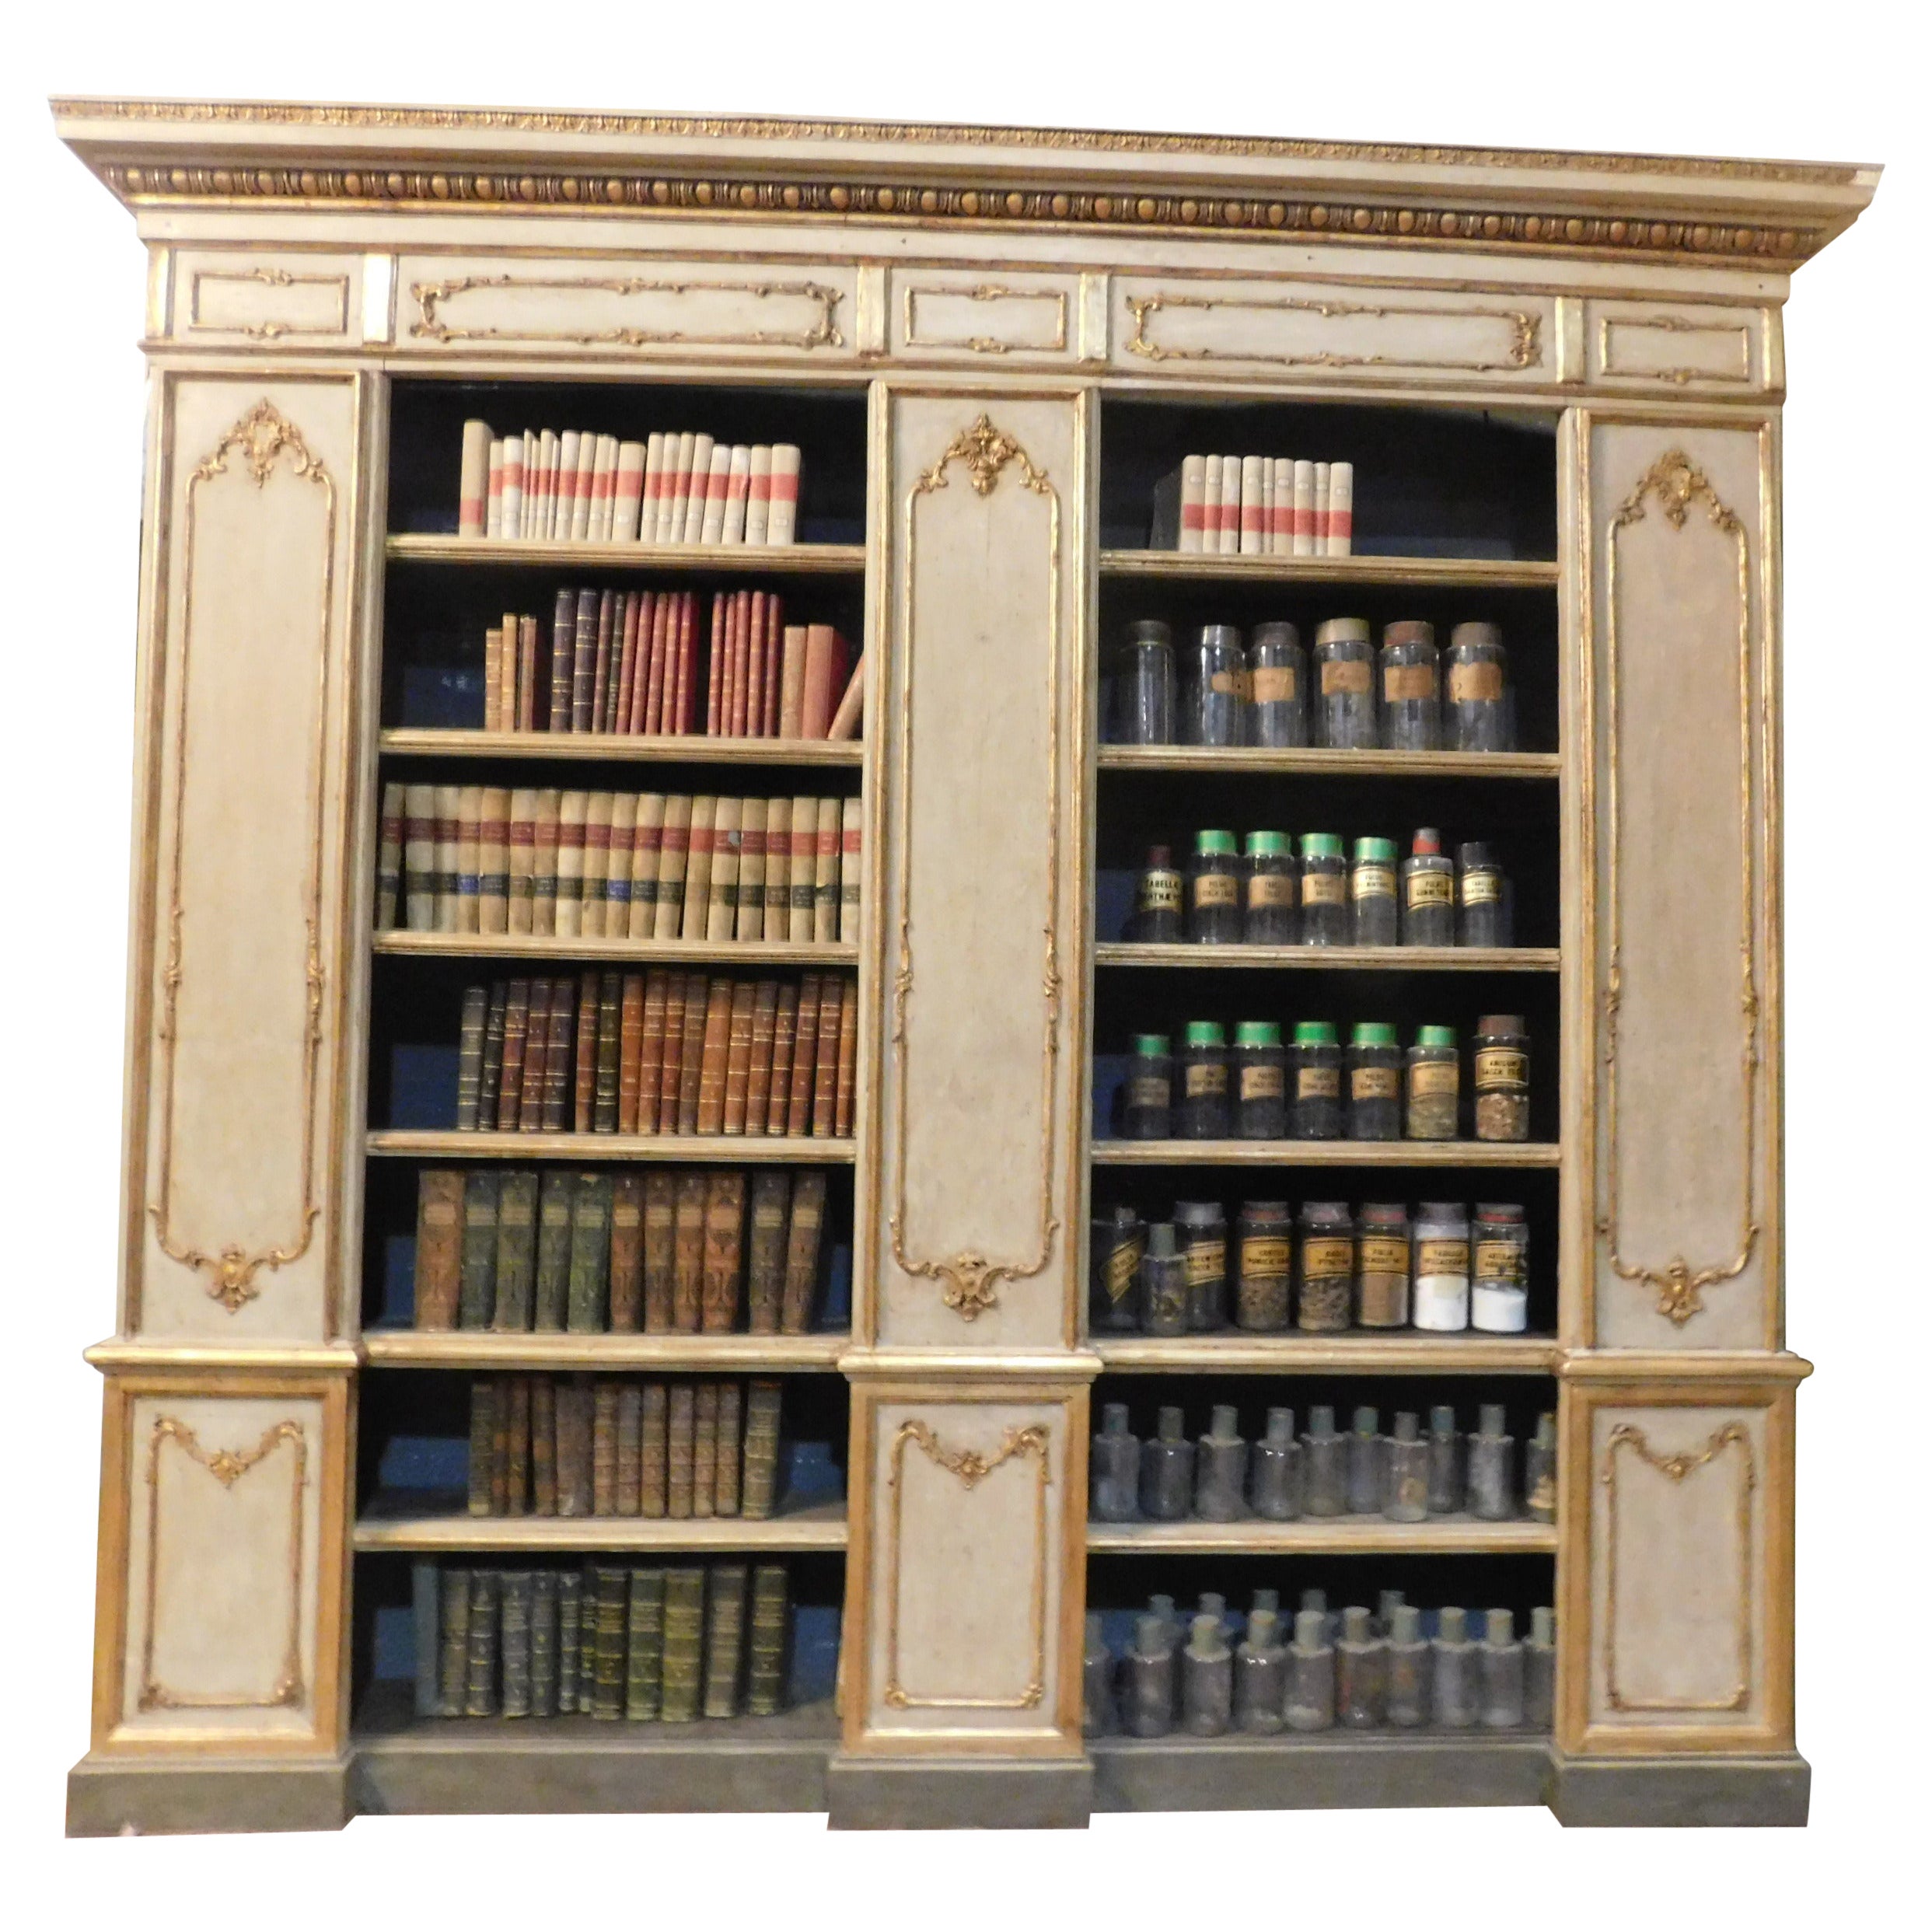 Antique Lacquered Gilded Bookcase, Carved Columns & Friezes, 19th Century Italy